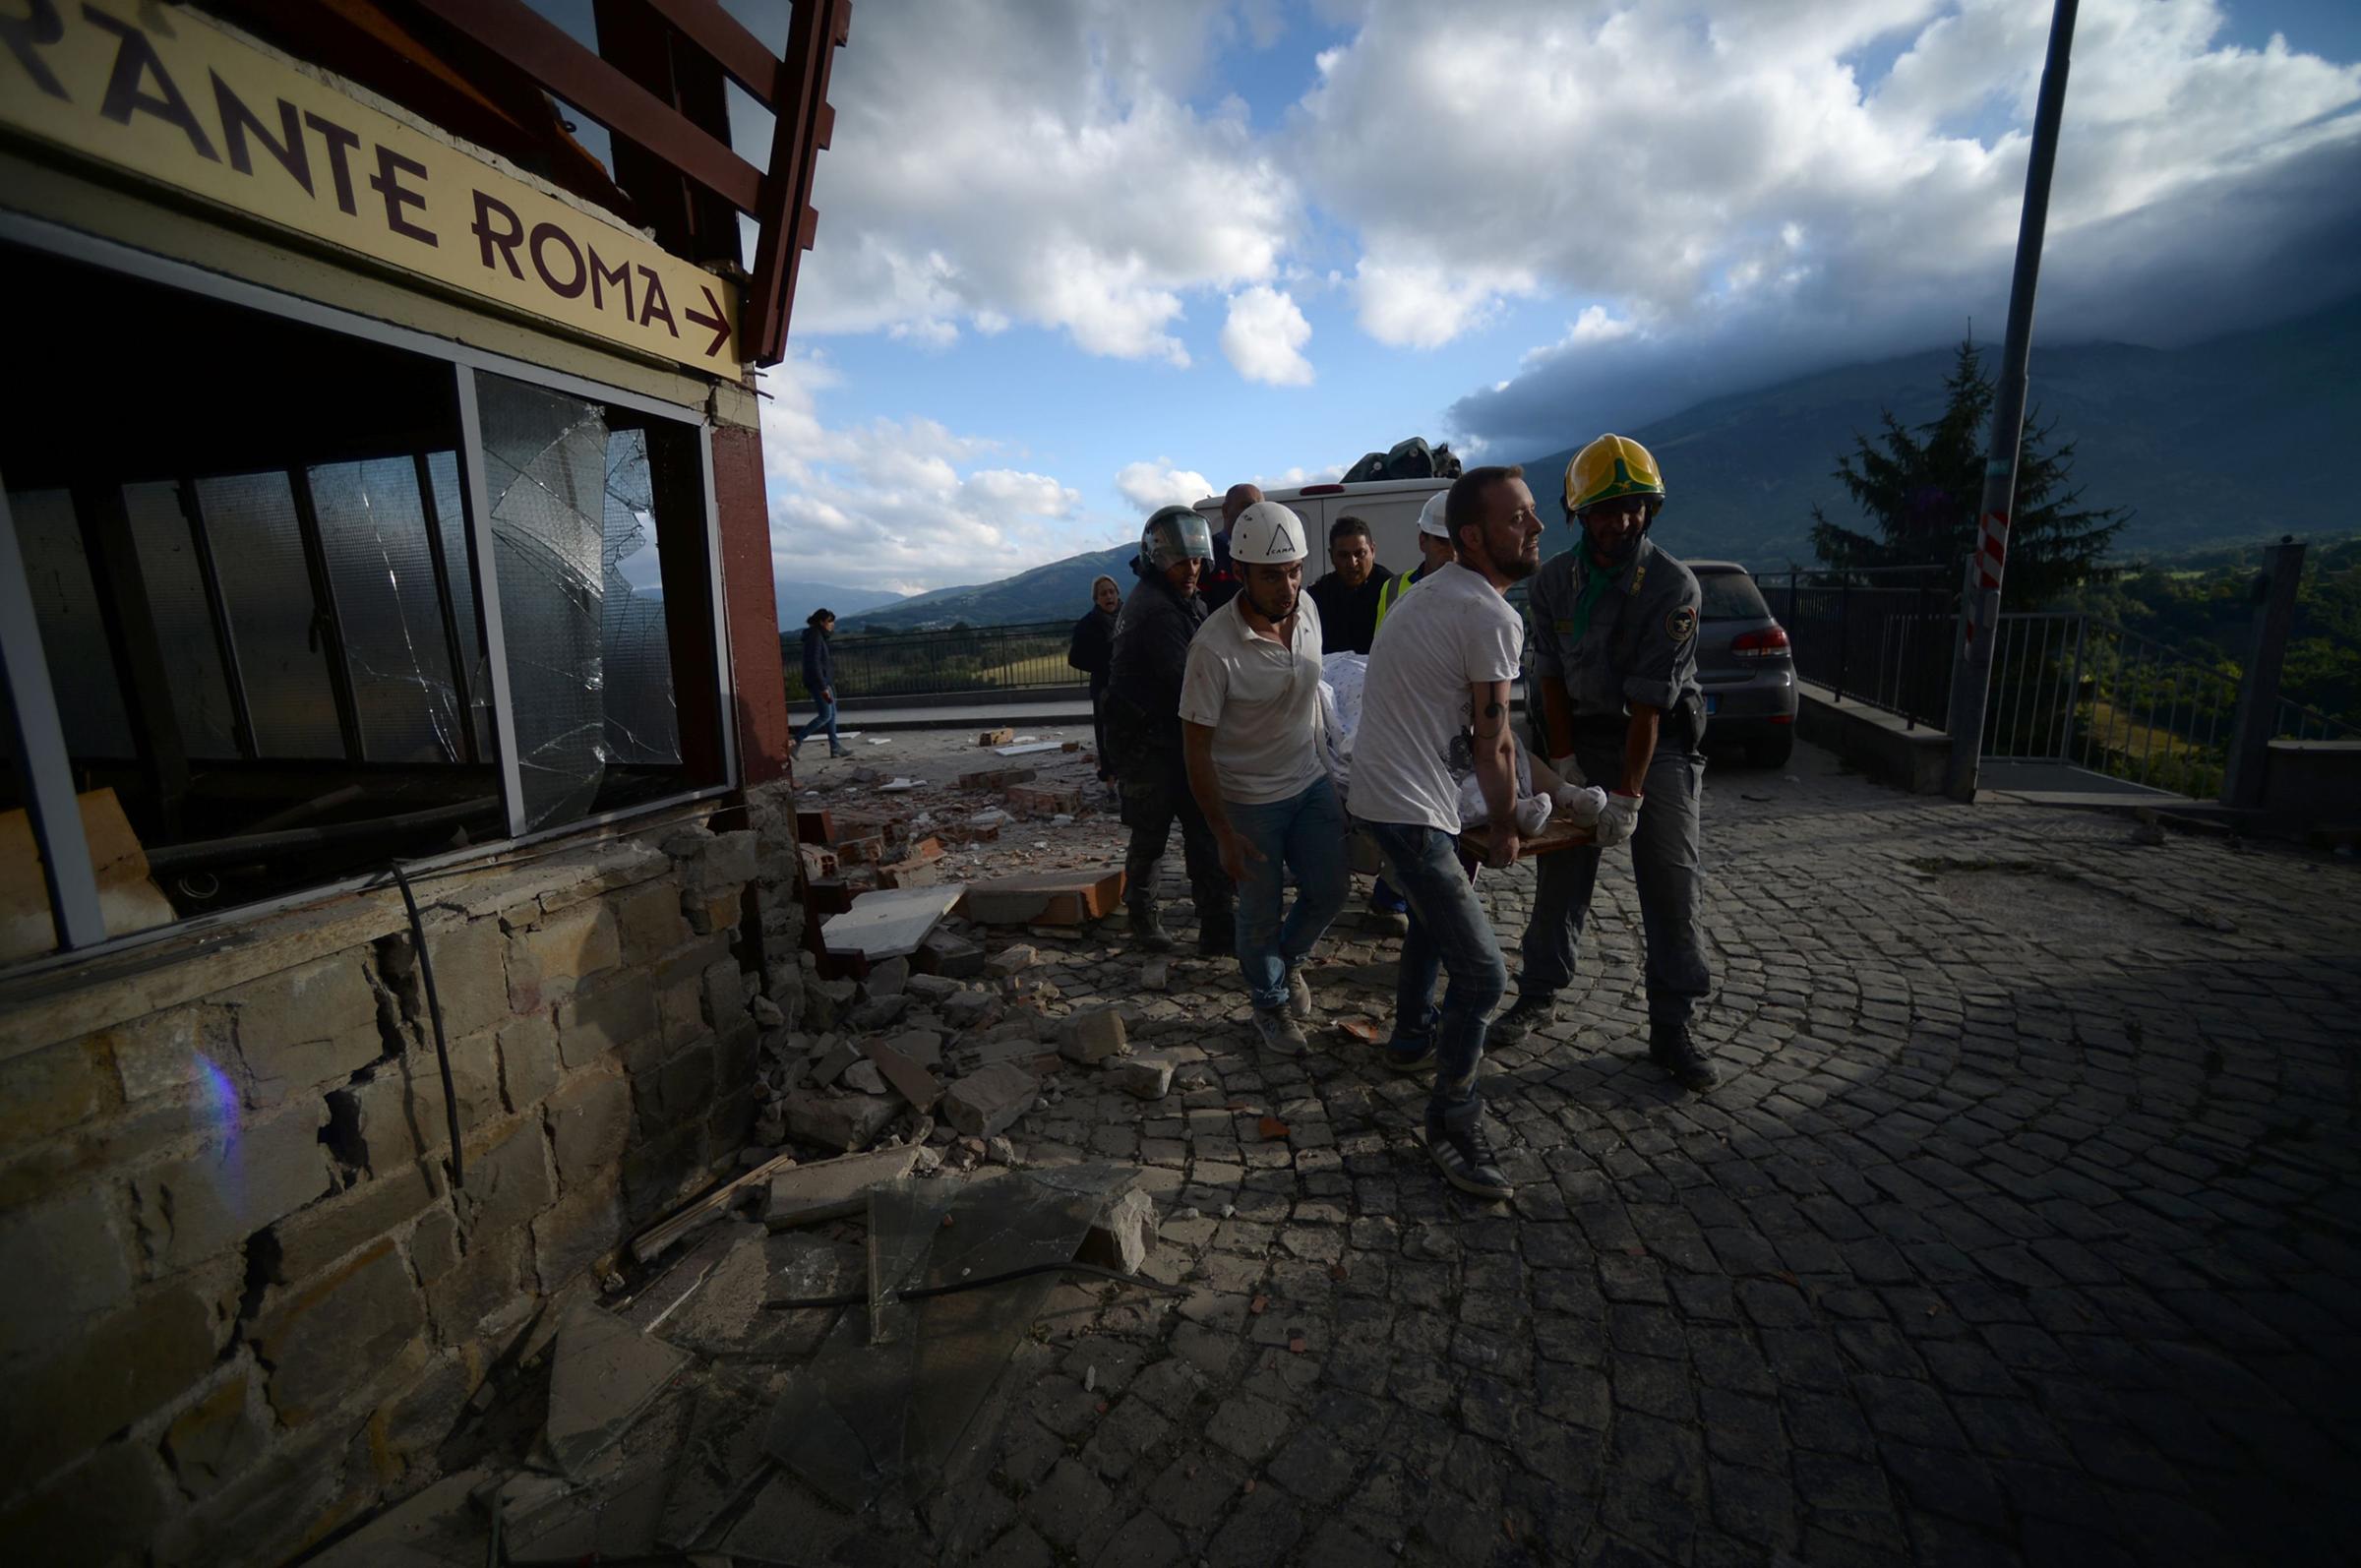 Rescuers carry a man on a stretcher in front of a damaged building after a strong earthquake hit central Italy, in Amatrice on Aug. 24, 2016.